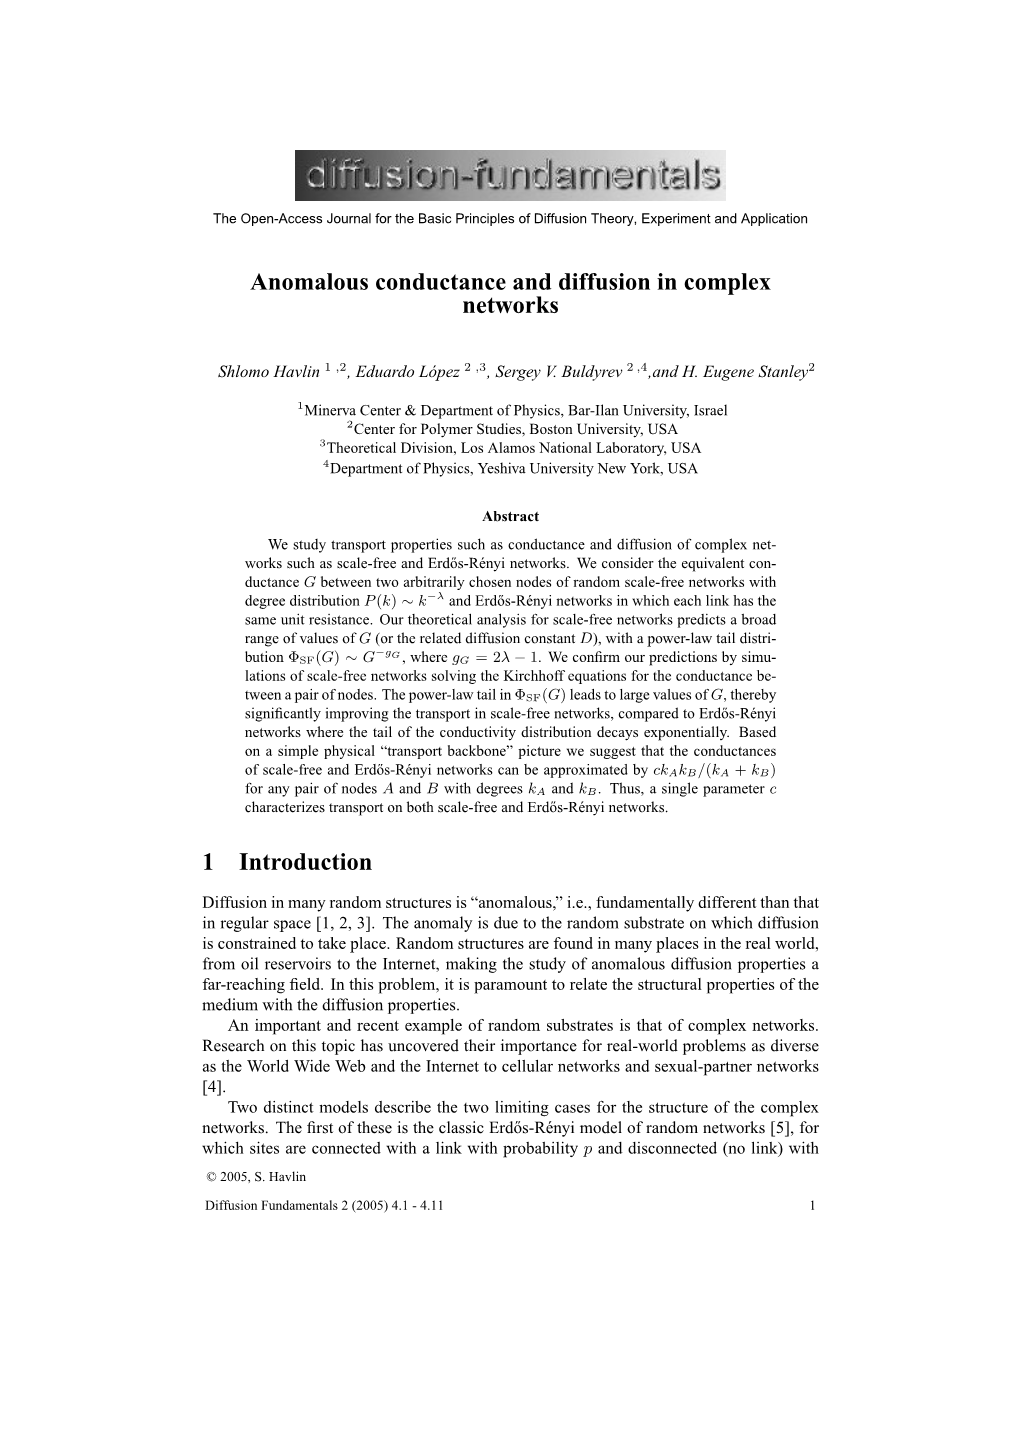 Anomalous Conductance and Diffusion in Complex Networks 1 Introduction